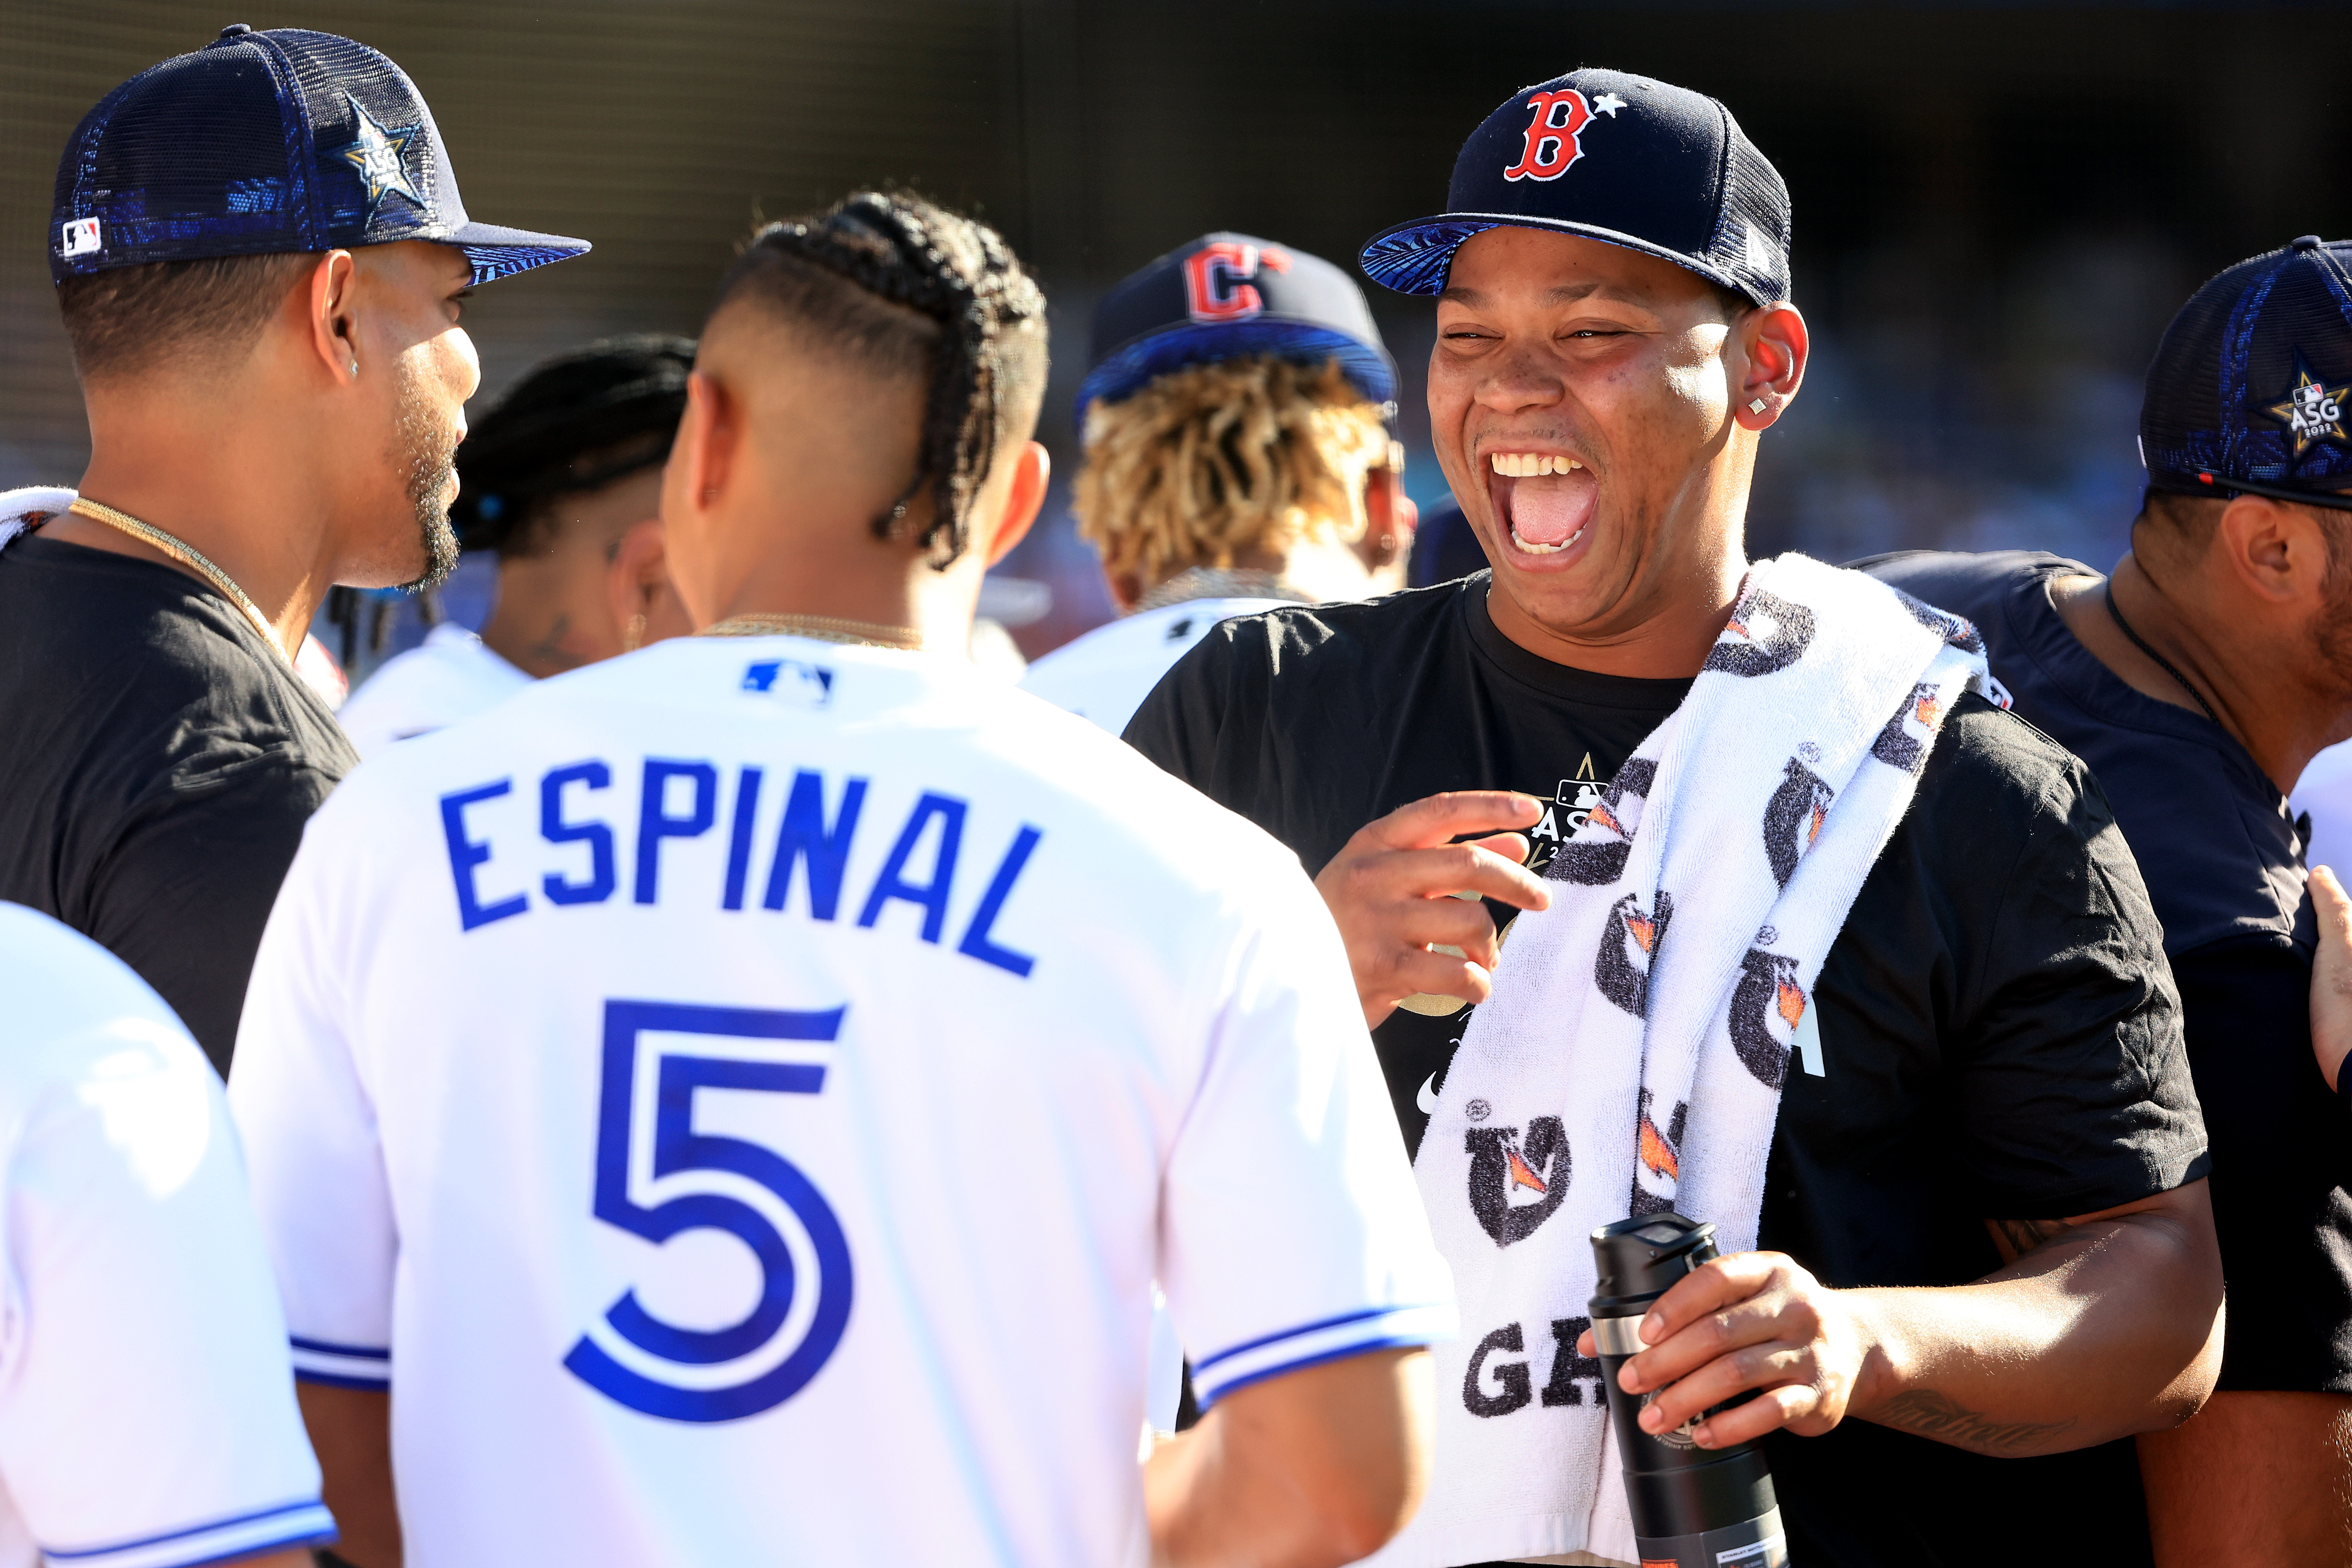 Rafael Devers declined extension offer from Red Sox this spring